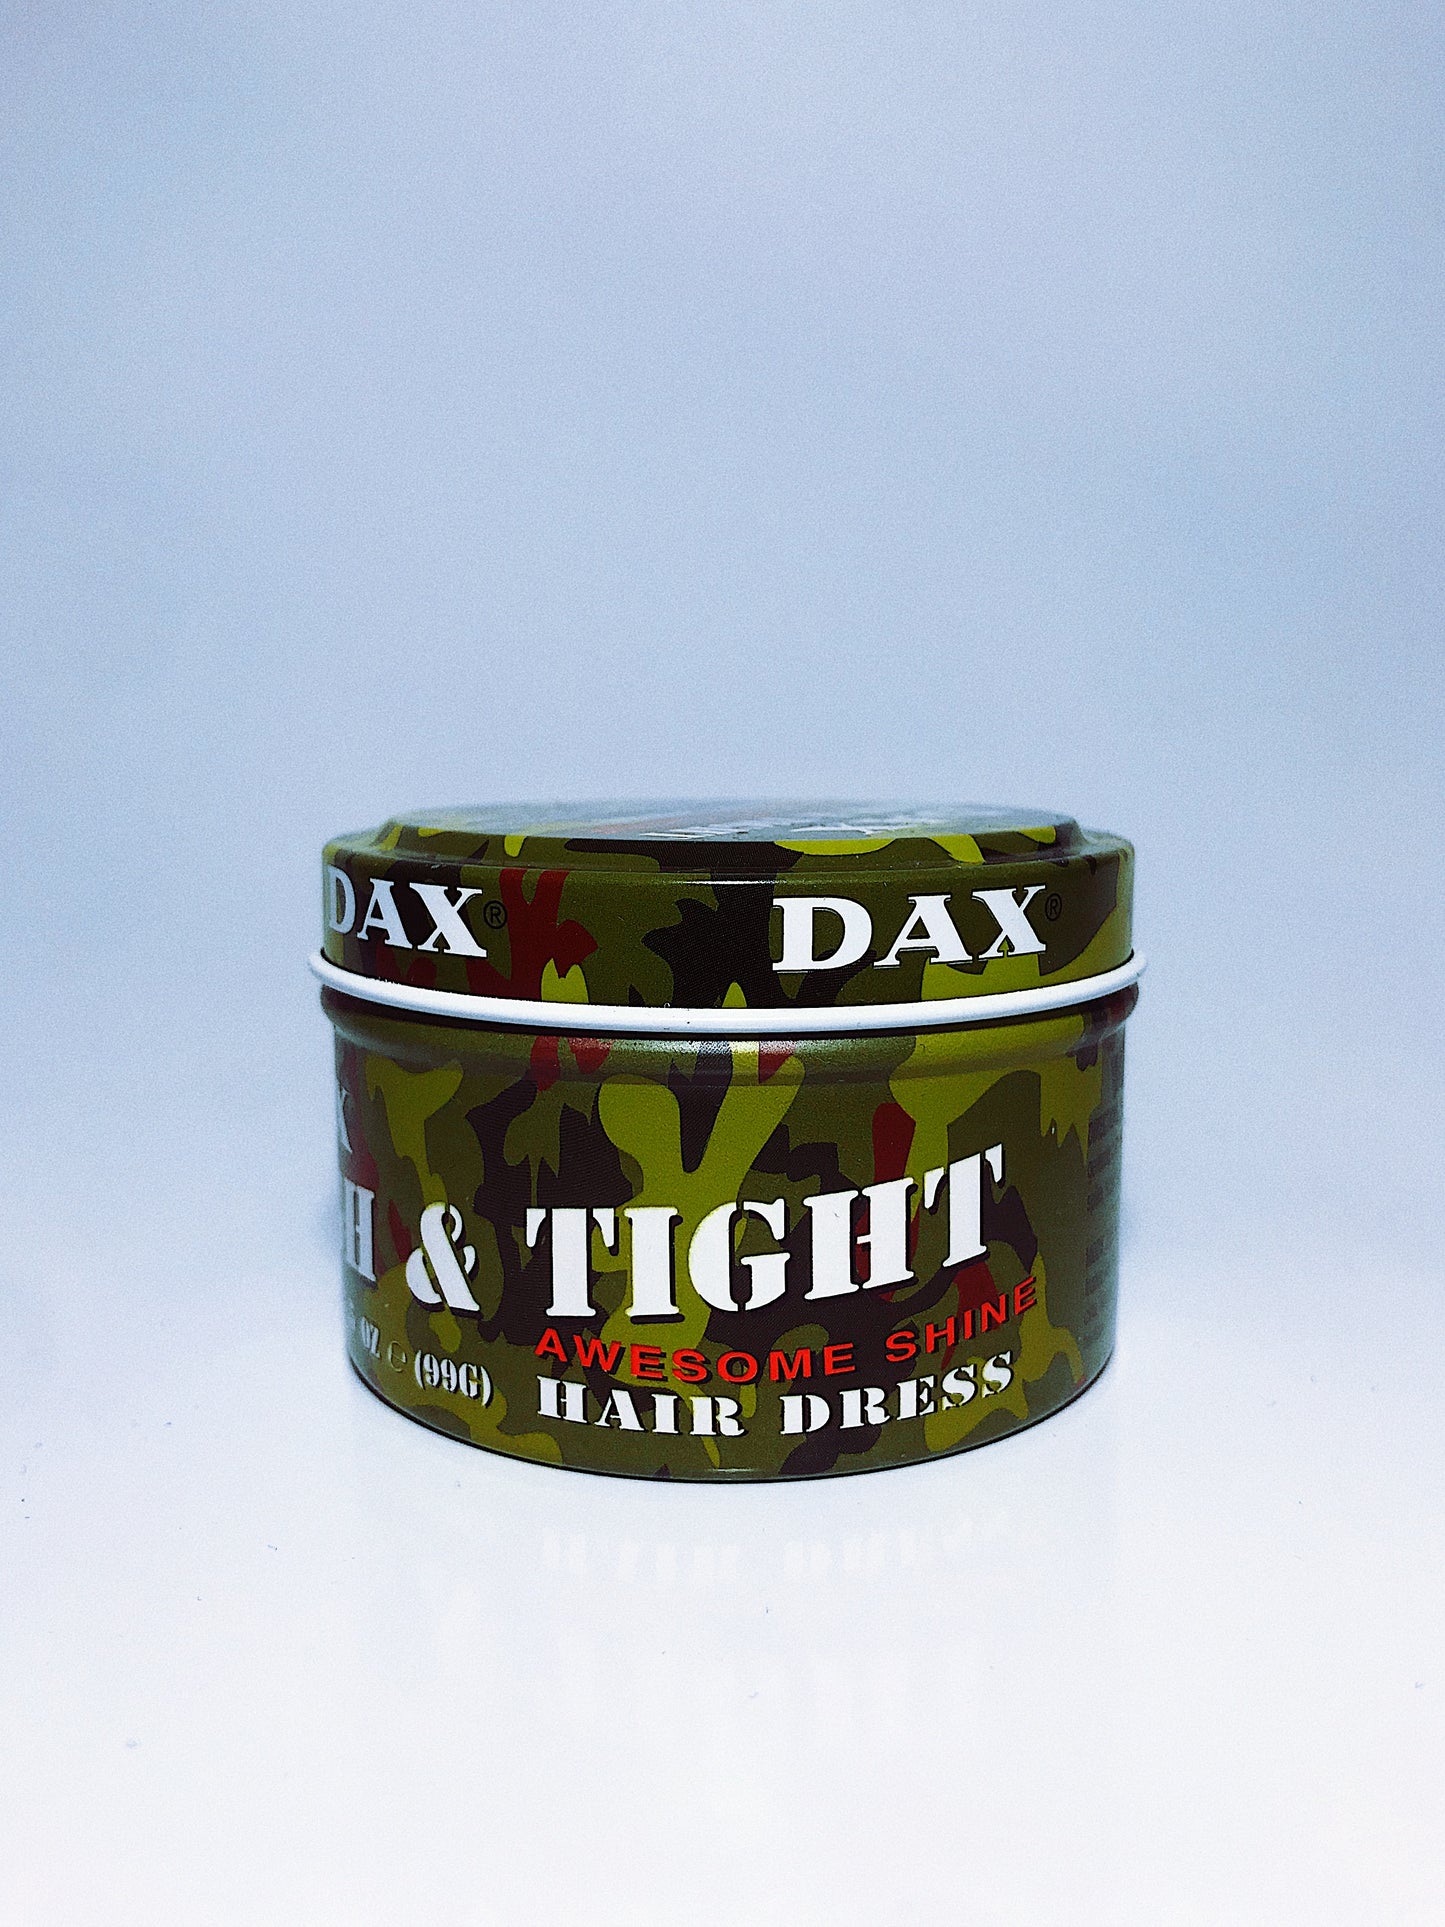 Dax High & Thight Awesome Shine Hairdress